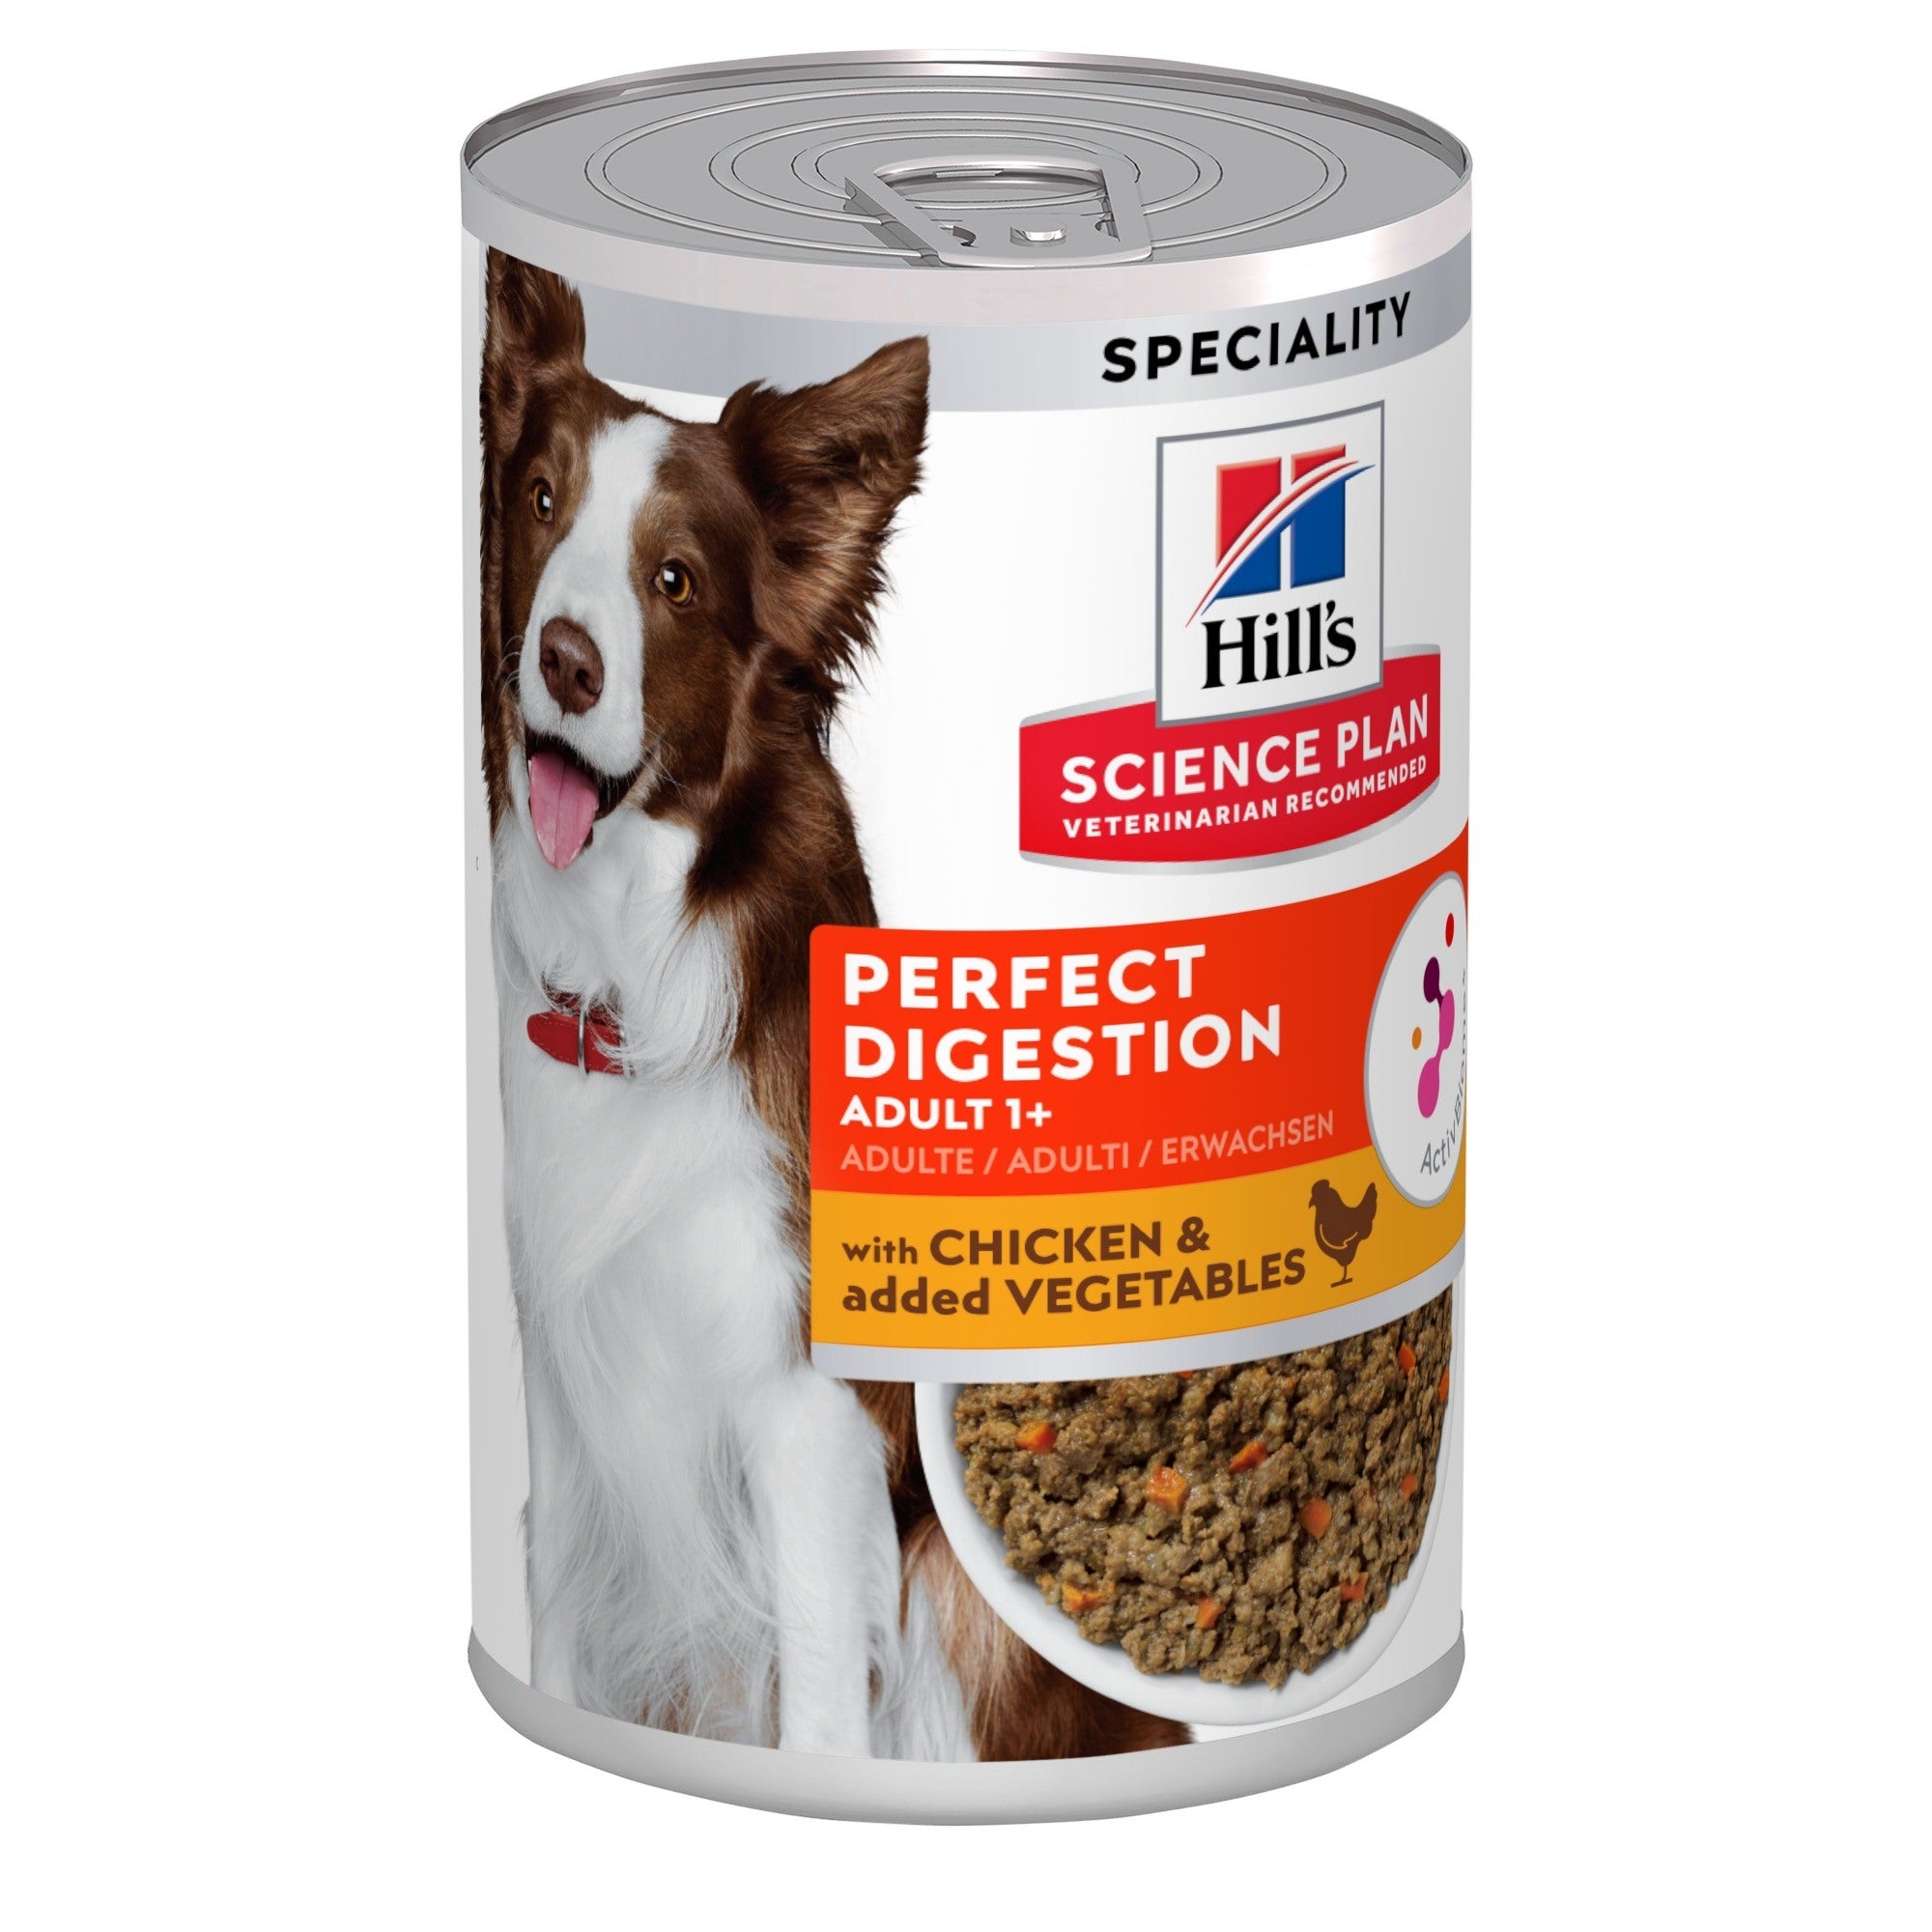 Hill's Science Plan Perfect Digestion Adult 1+ Dog Food with Chicken and Veg